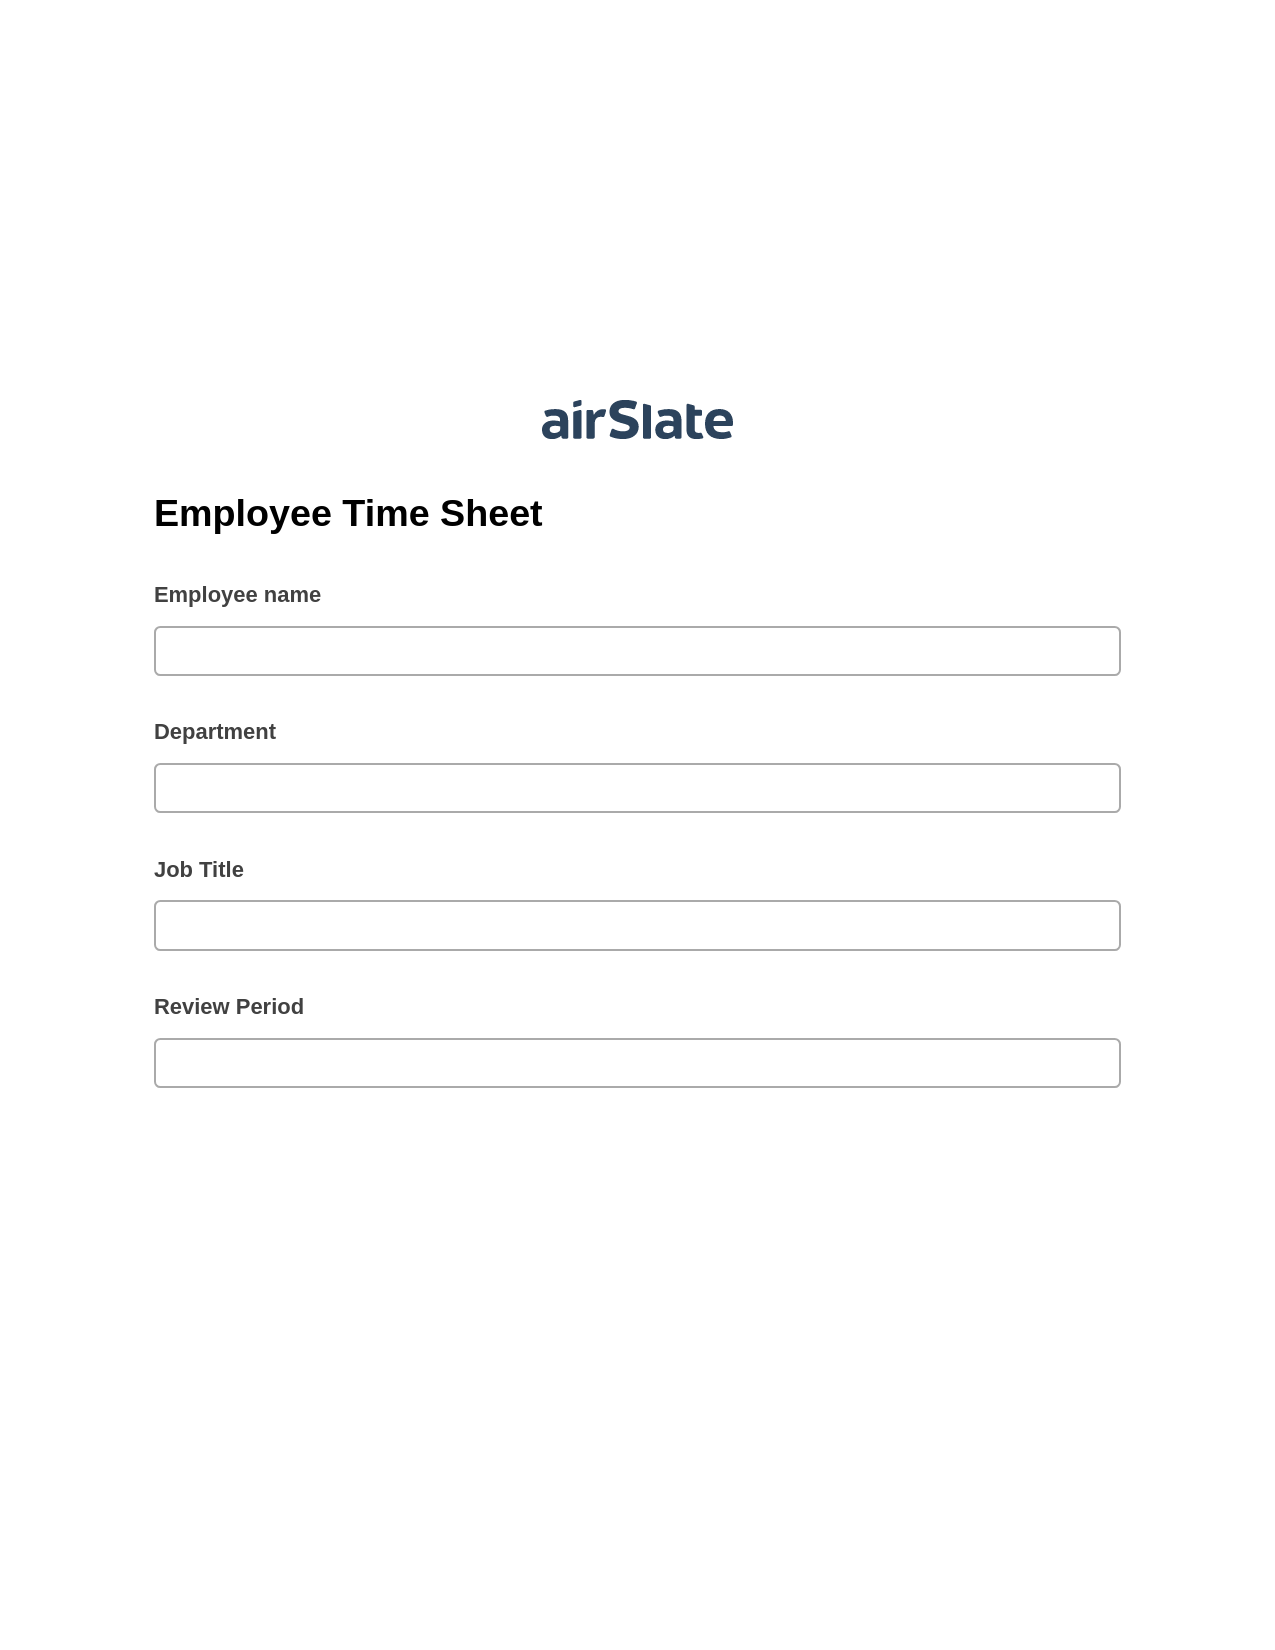 Employee Time Sheet Pre-fill from Salesforce Records with SOQL Bot, Jira Bot, Export to NetSuite Bot